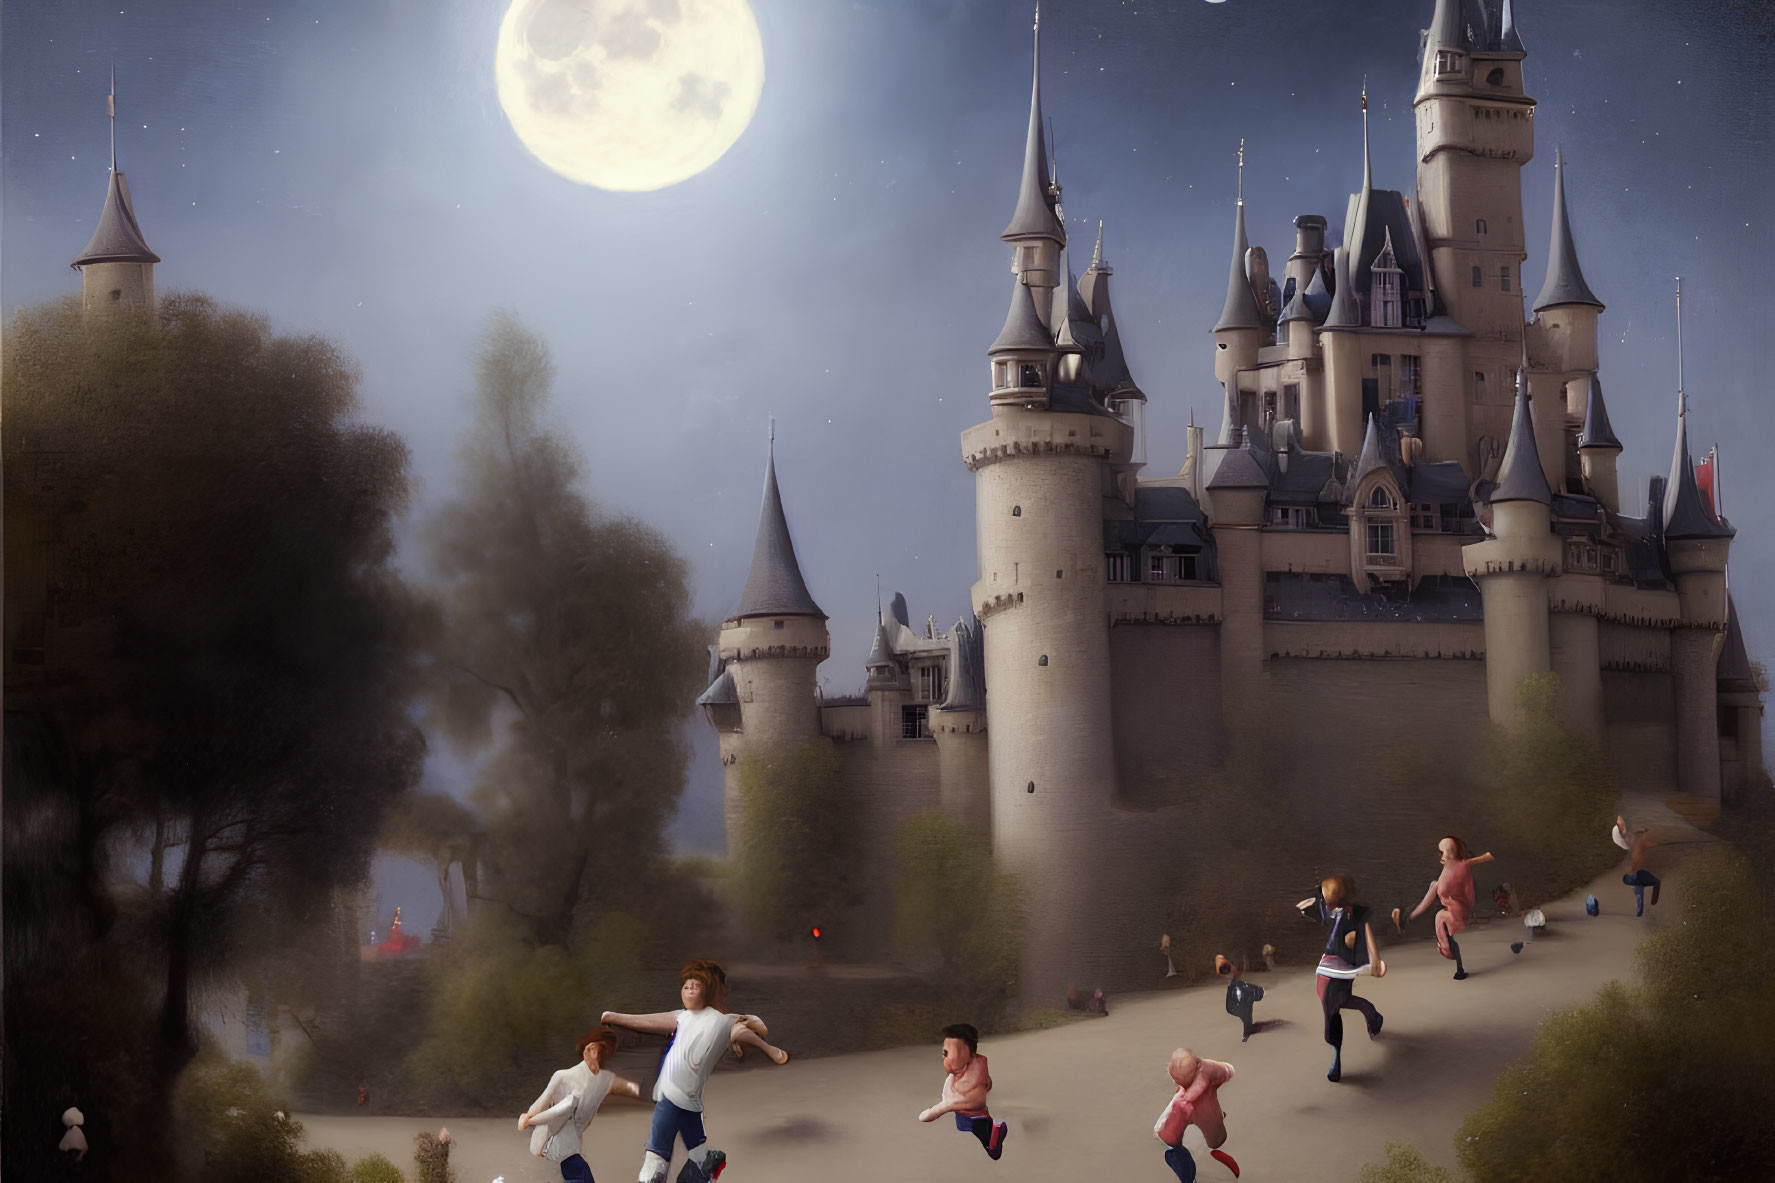 Majestic castle under full moon with modern figures running towards viewer